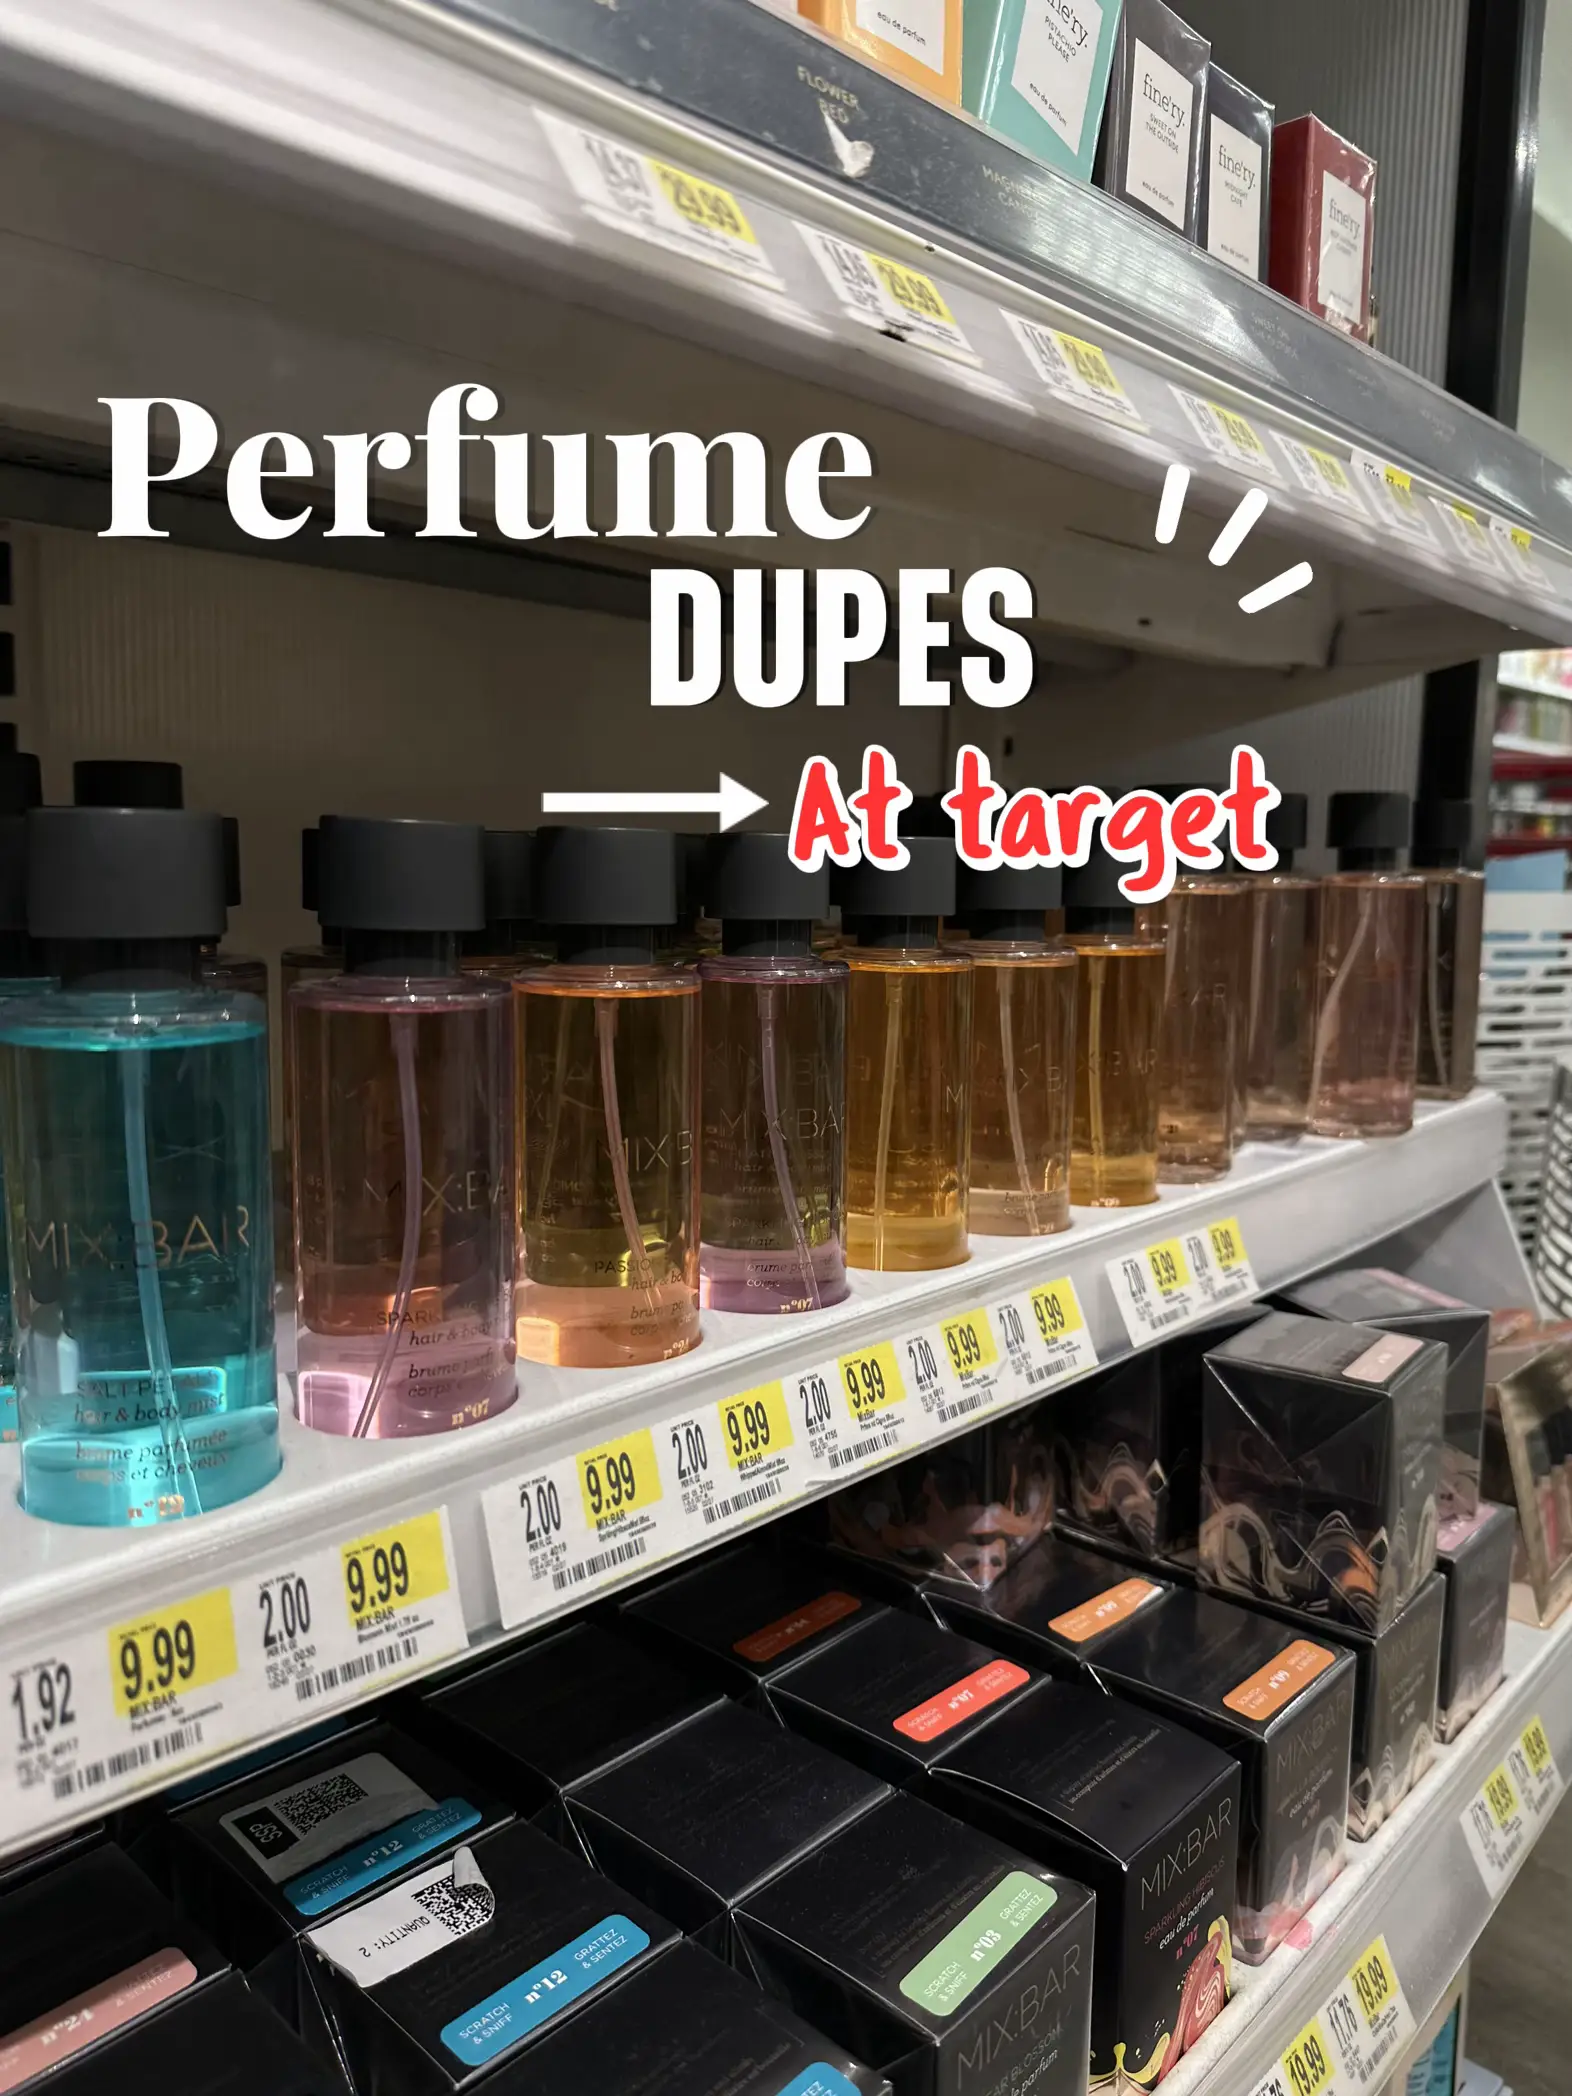 The 7 Best Skims Dupes You Can Buy From Target—Starting at Just $5